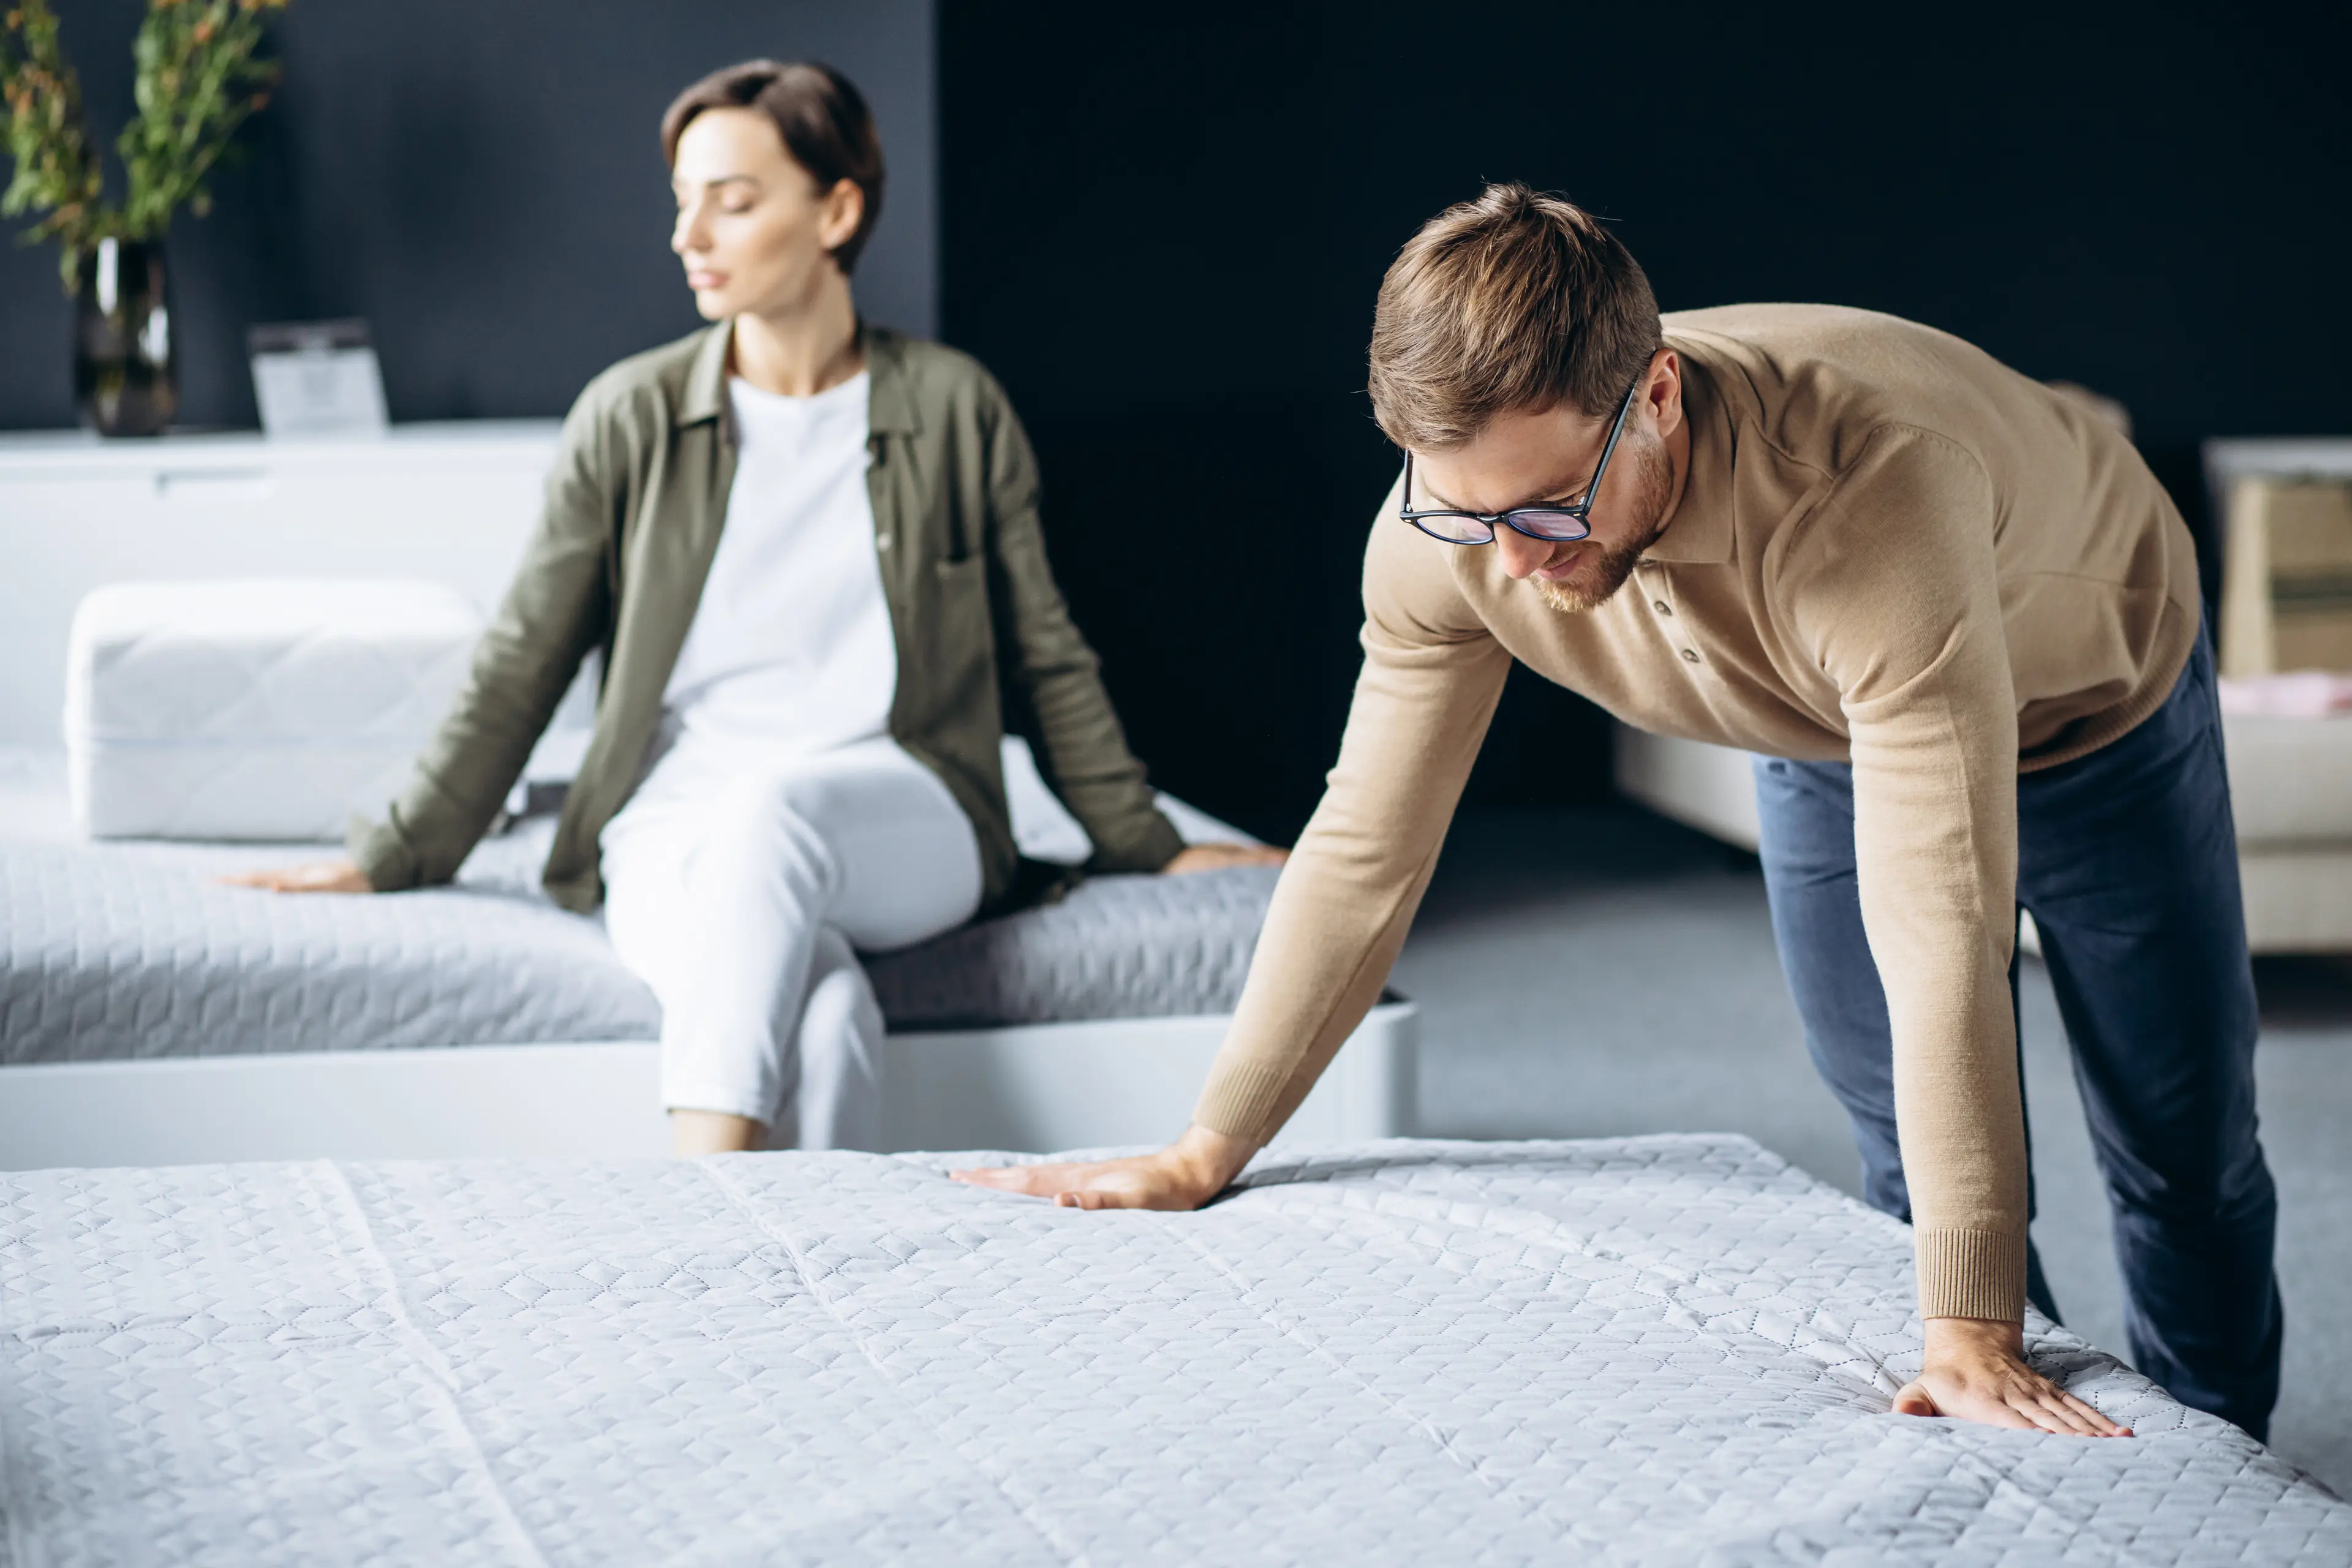 A man and woman test mattresses in a bright store. He leans forward, both hands on the mattress to test the firmness while the woman is sitting on another mattress to test the comfort. They are not engaged, perhaps zoned in their own mattress experiences.